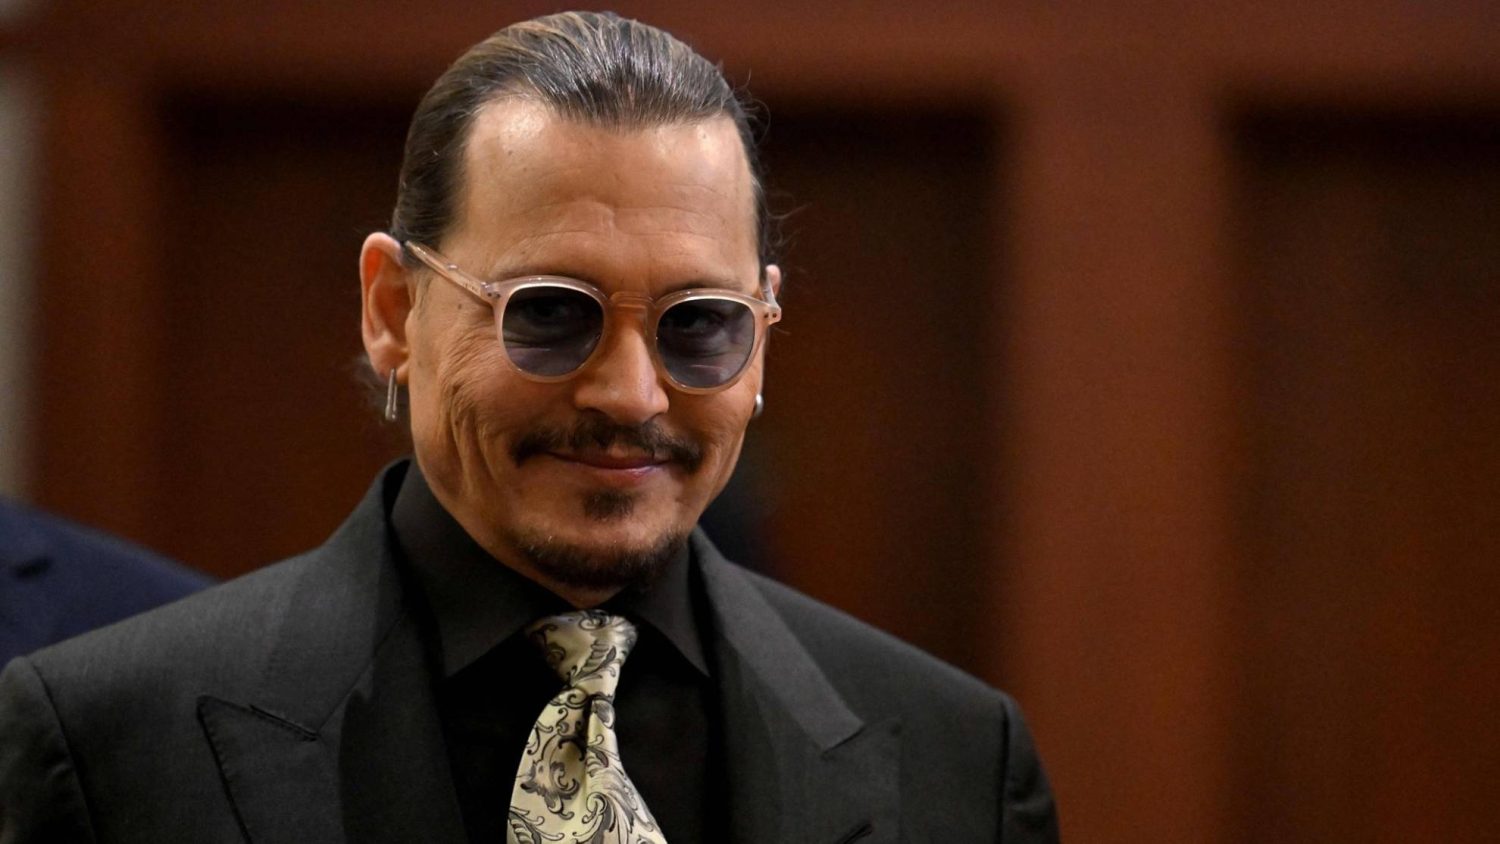 Johnny Depp Joins Tiktok To Thank 5.1 Million Fans For Their Support